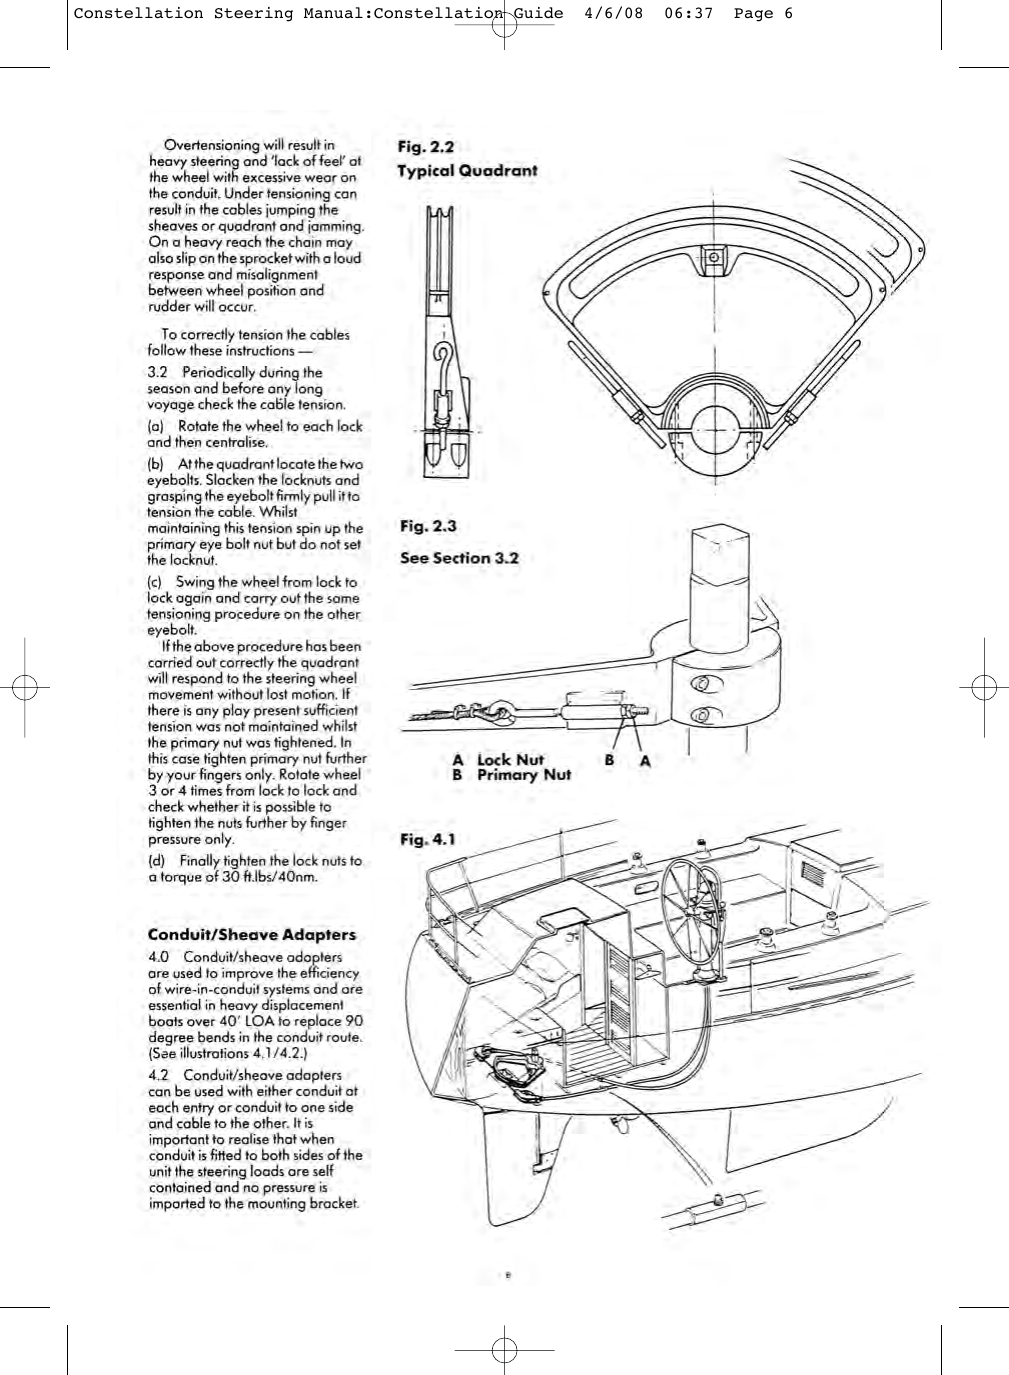 Page 6 of 8 - Constellation Steering Manual:Constellation Guide Constellation-Steering-Manual